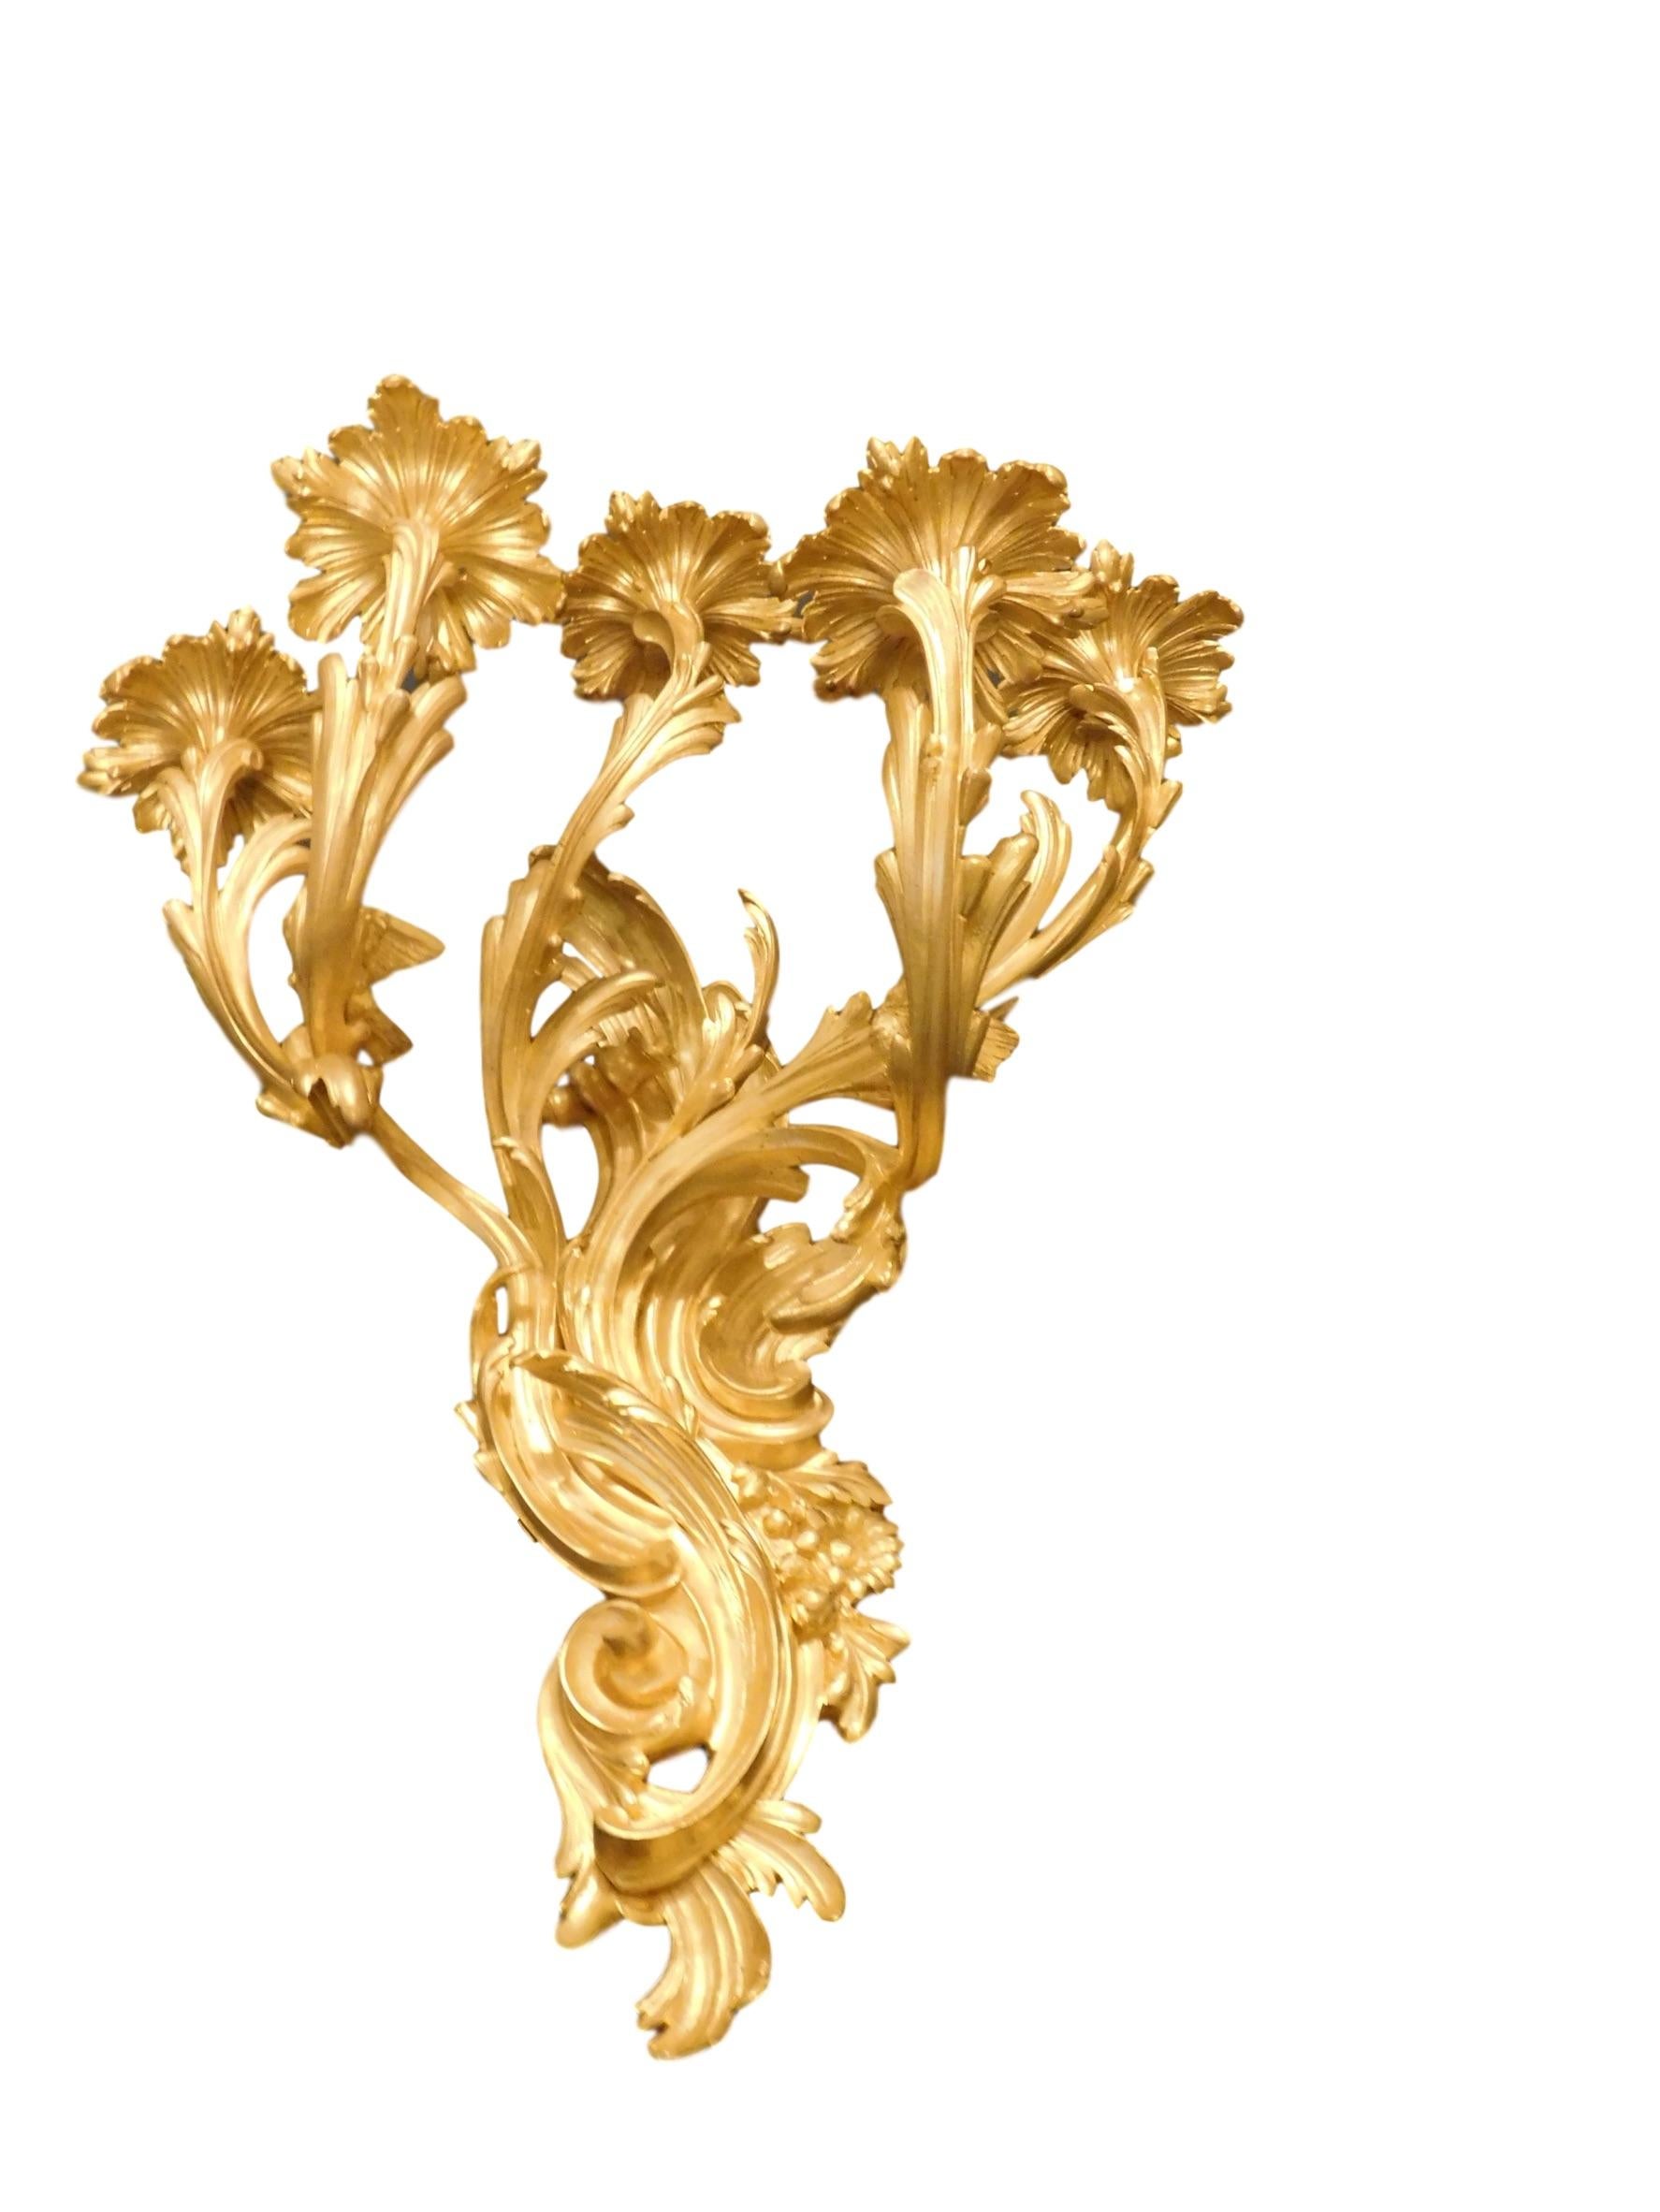 Impressive pair of Napoleon III period gold bronze five-light candle sconces by Victor Paillard. Exquisitely cast 22-karet mercury gold bronze body with a deep, warm and glowing patina. Mercury gold bronze is rare and is recognized for its finest